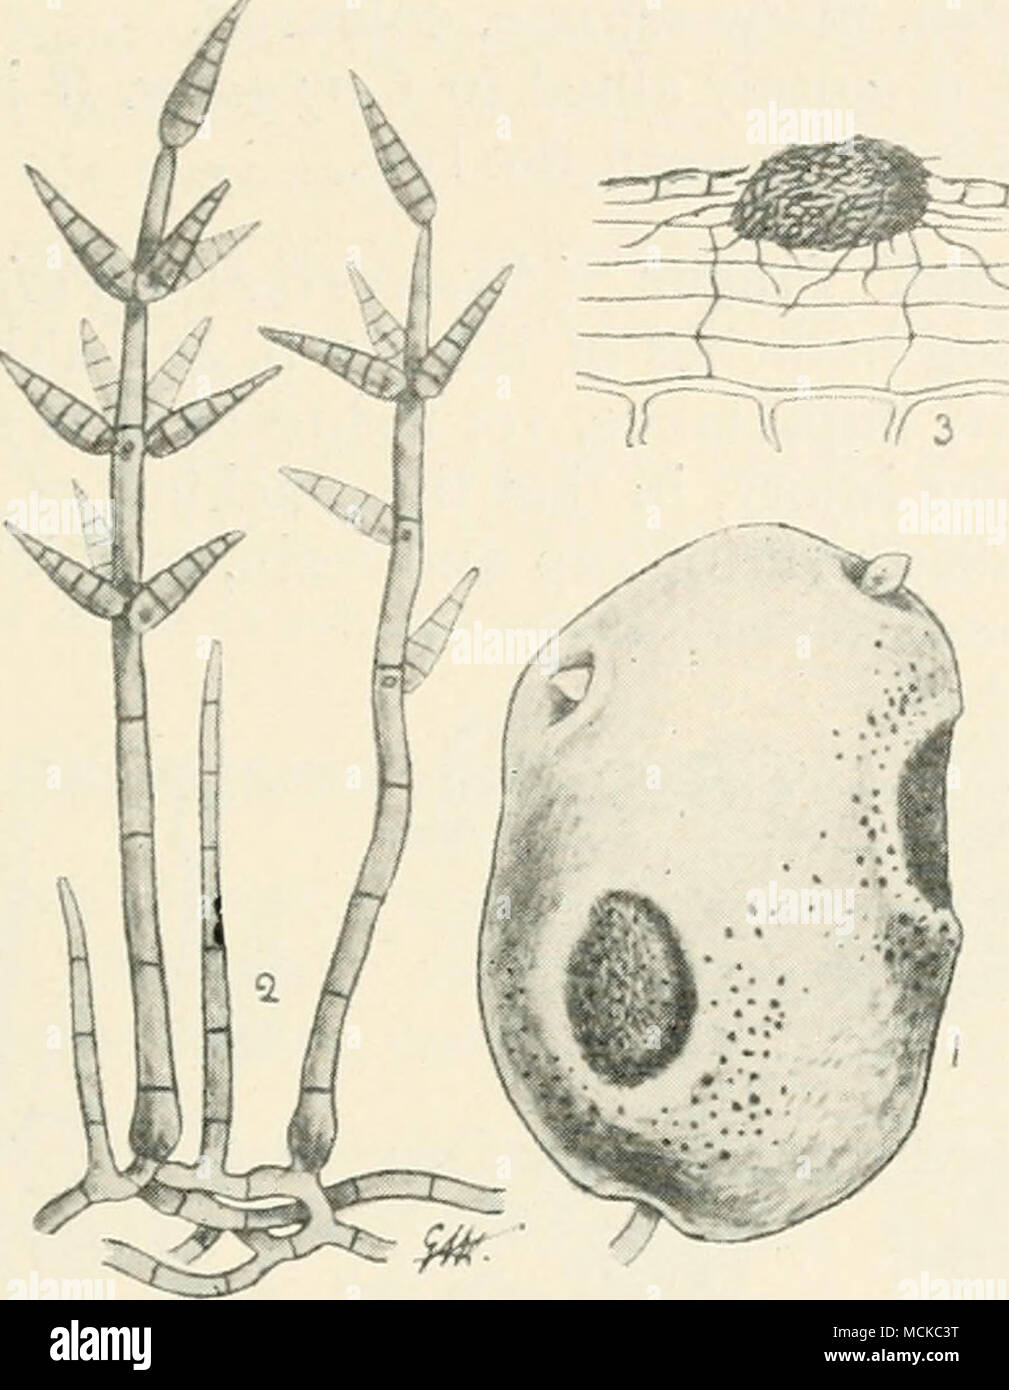 . Fig. 142.—Spondylocladitim atrovircns. i, po- tato showing patches of the fungus and micro- sclerotia ; 2, fruiting condition of the fungus ; 3, micro-sclerotium. 2 and 3 mag. dingy olive or brownish, up to 400 /x high; conidia elongato- ovate, apex narrowed, 5-7-septate, arranged in whorls, coloured like the stem, 30-50X6-9 i. Potatoes bearing sclerotia or showing the sunken areas characteristic of the disease, should not be used for sets. Land that has produced a diseased crop should not be again planted with potatoes for some years. Lime or kainit would probably assist in destroying scle Stock Photo